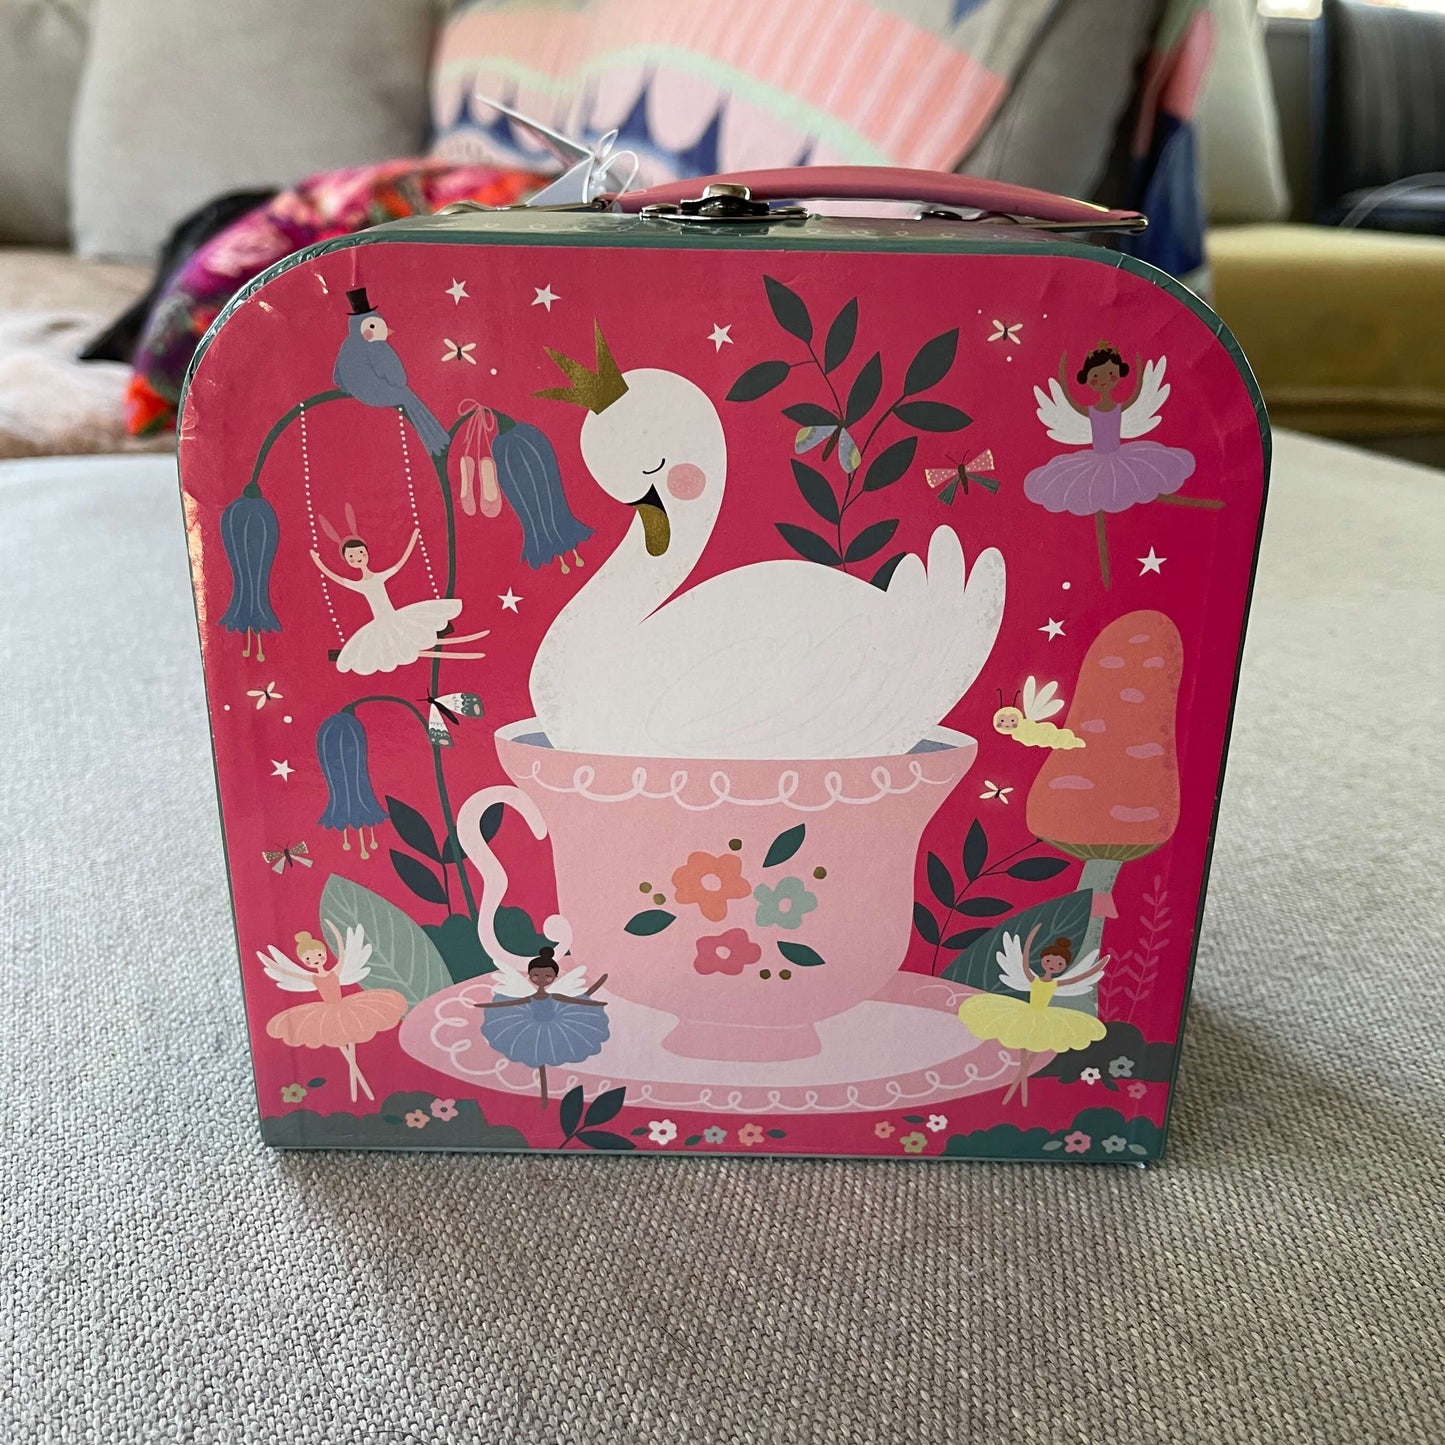 Bright pink childrens cardboard suitcase with fairys and swans.